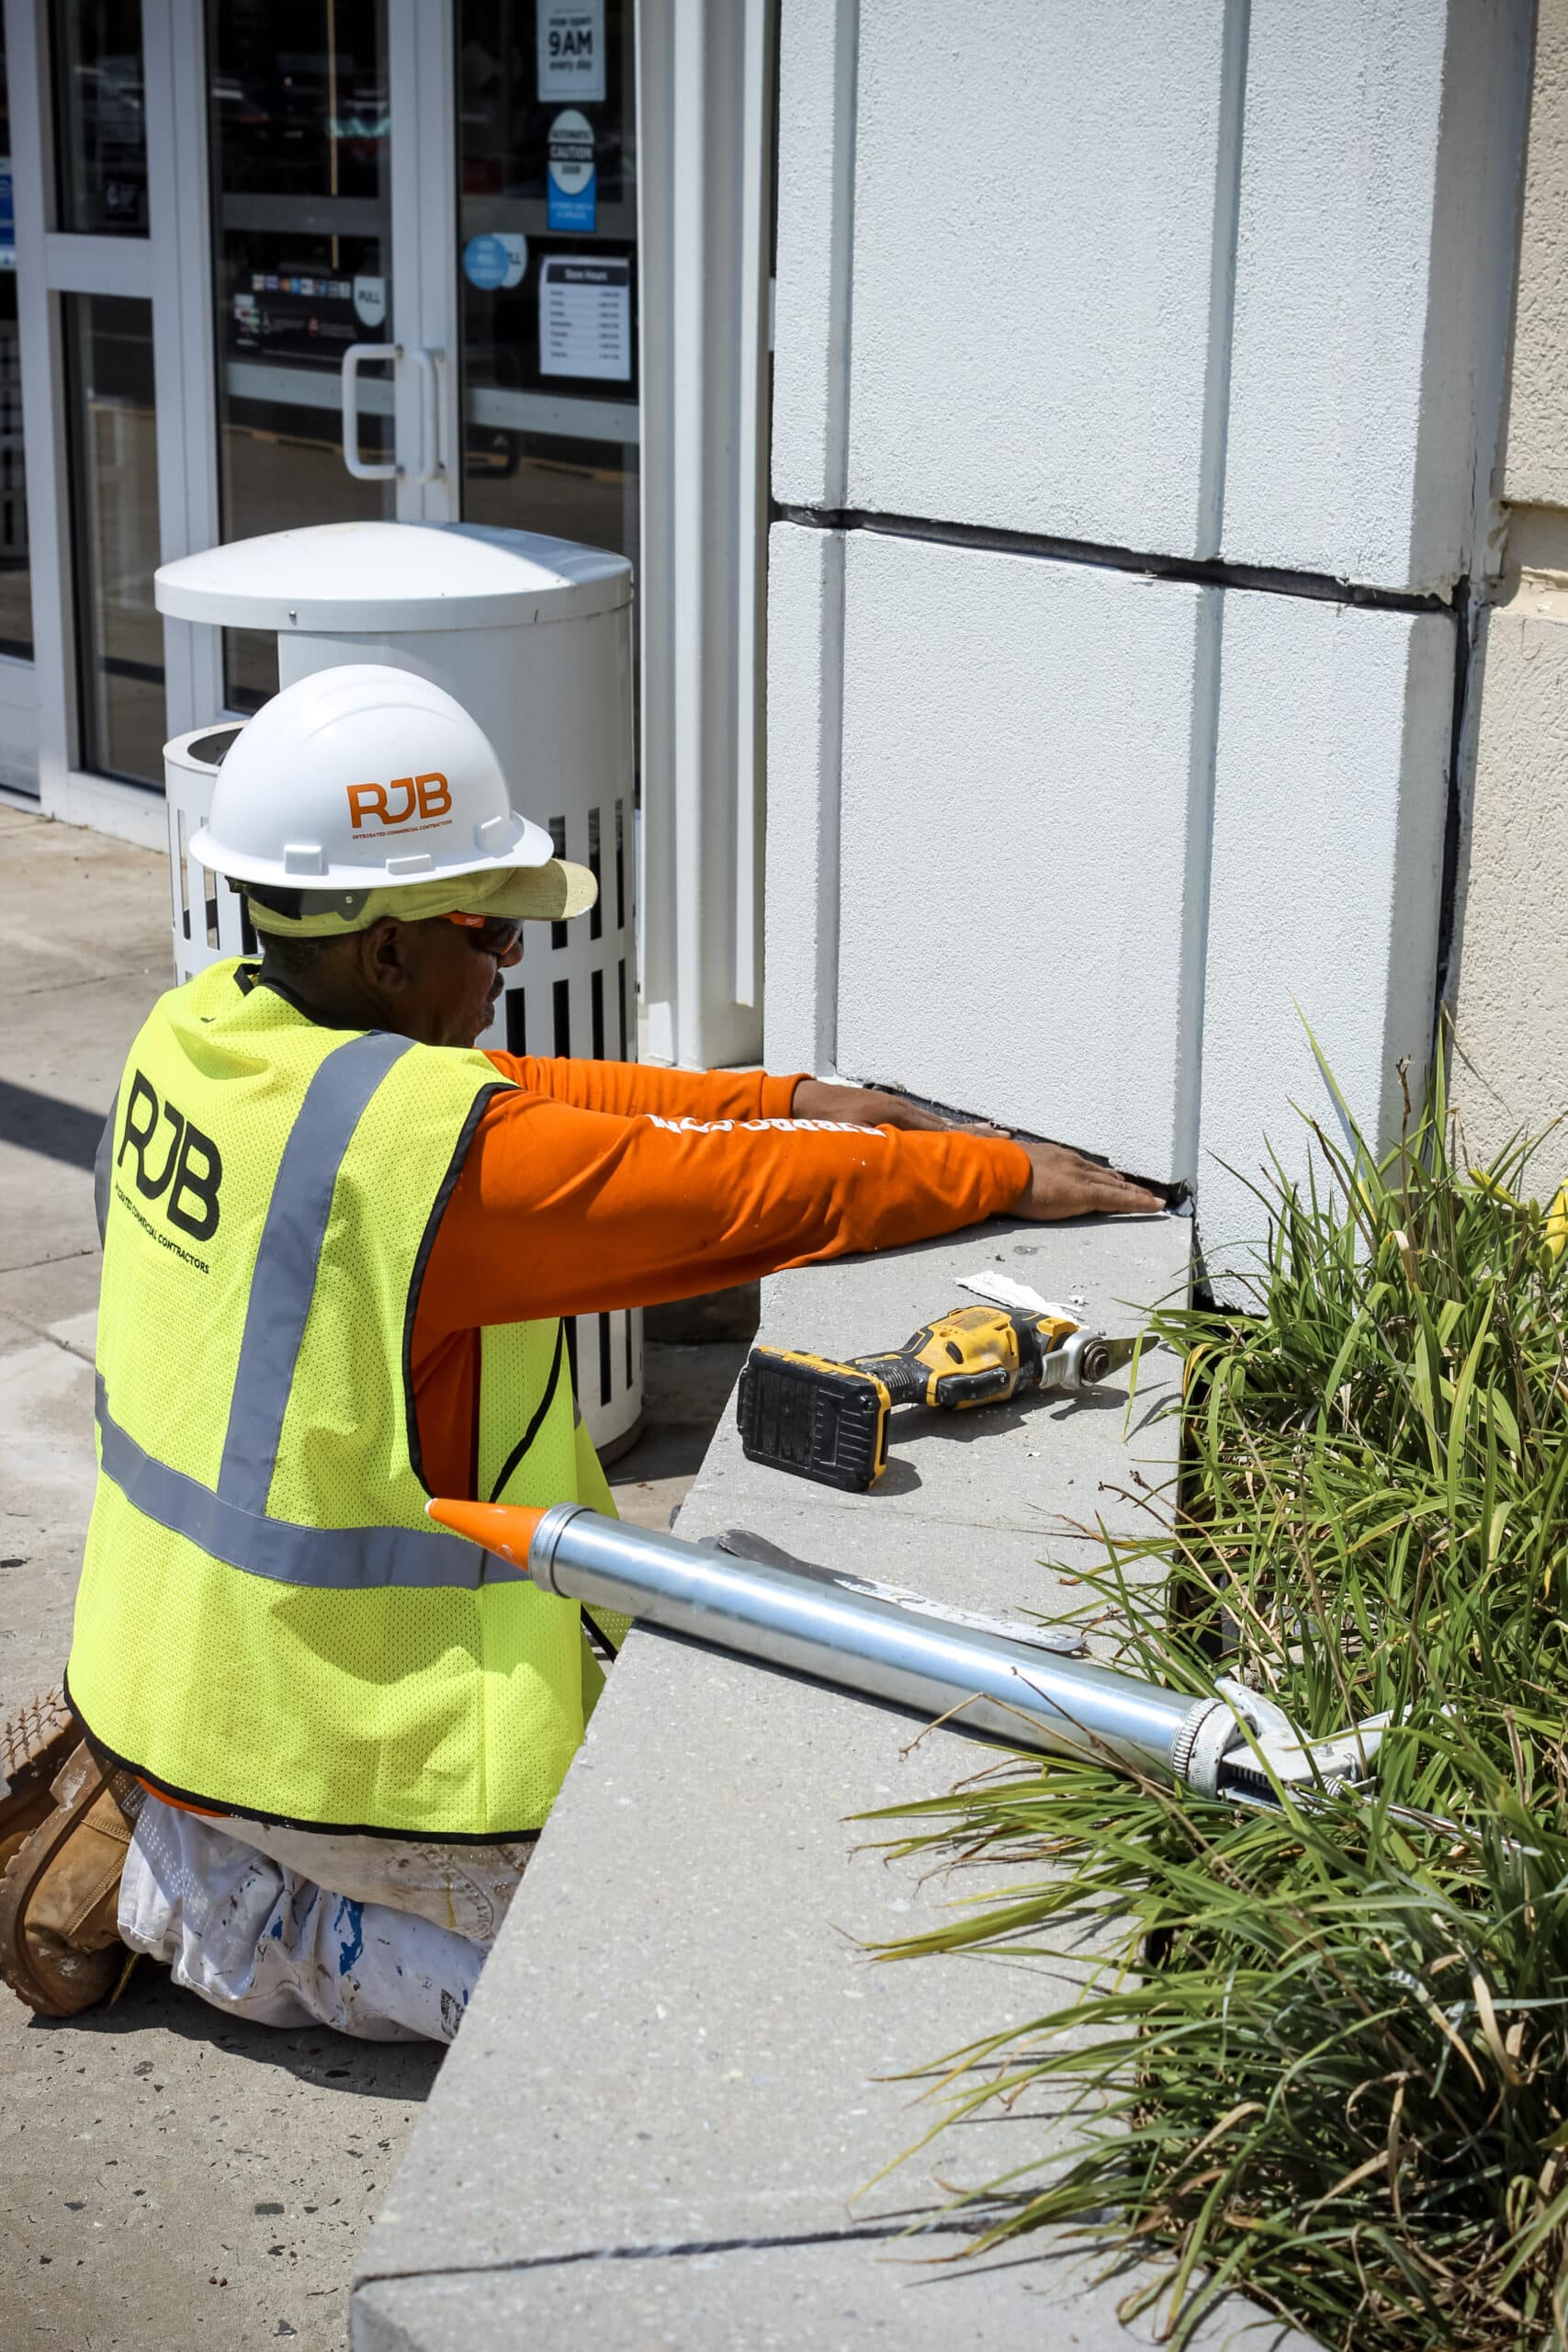 RJB employee working on the exterior of a retail building